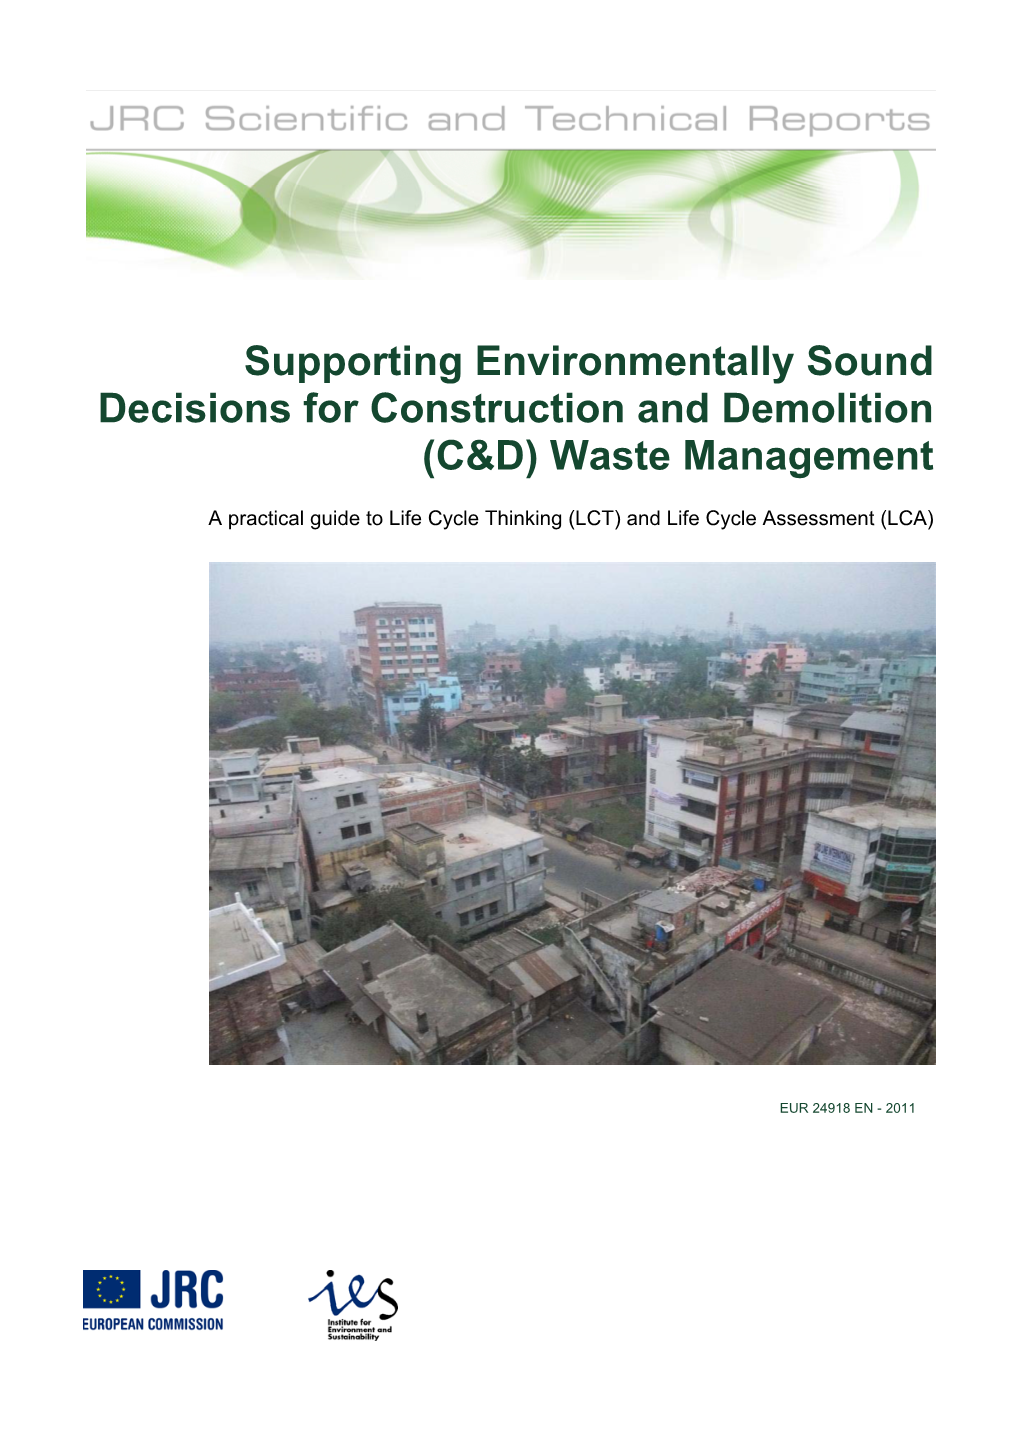 Supporting Environmentally Sound Decisions for Construction and Demolition (C&D) Waste Management